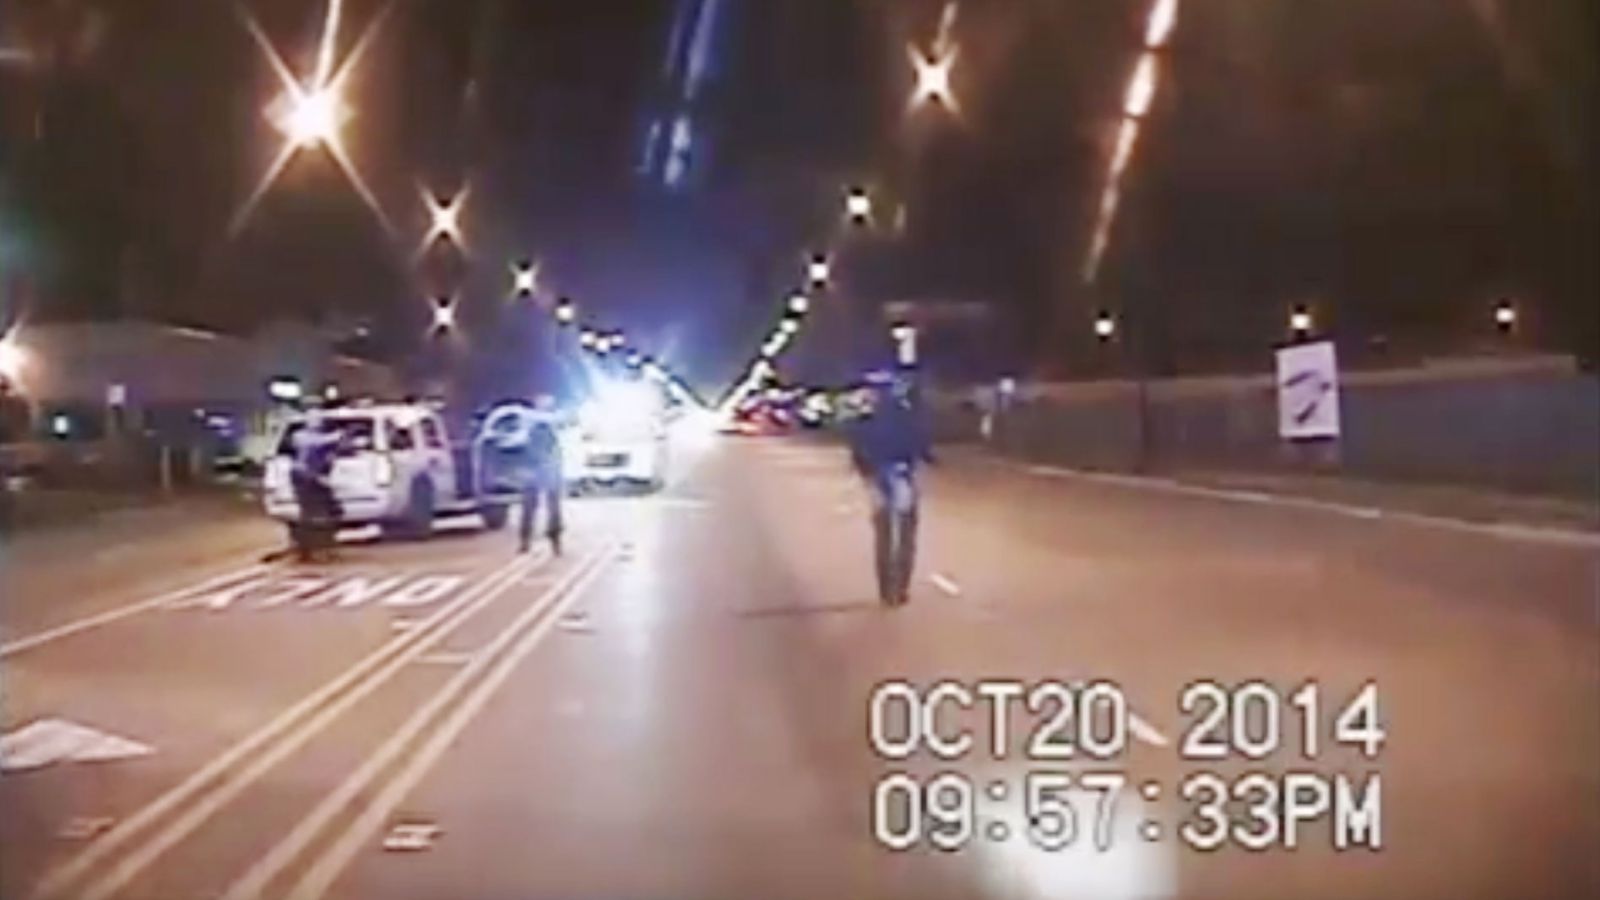 Screenshot from the released Laquan McDonald video